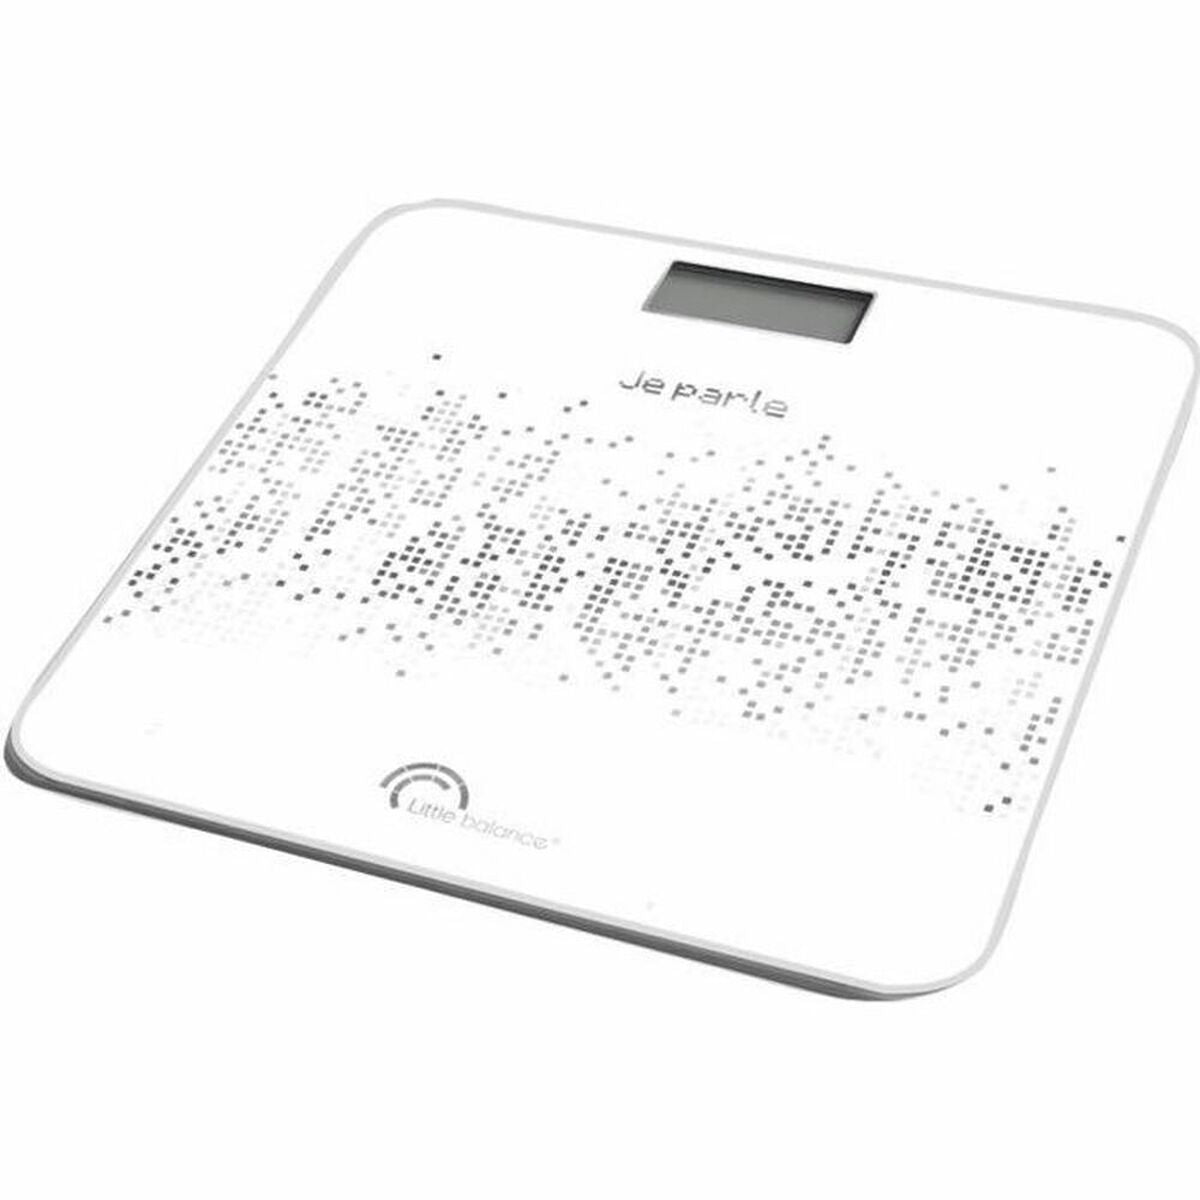 Digital personal scale Little Balance Talking Voice White Black Tempered glass